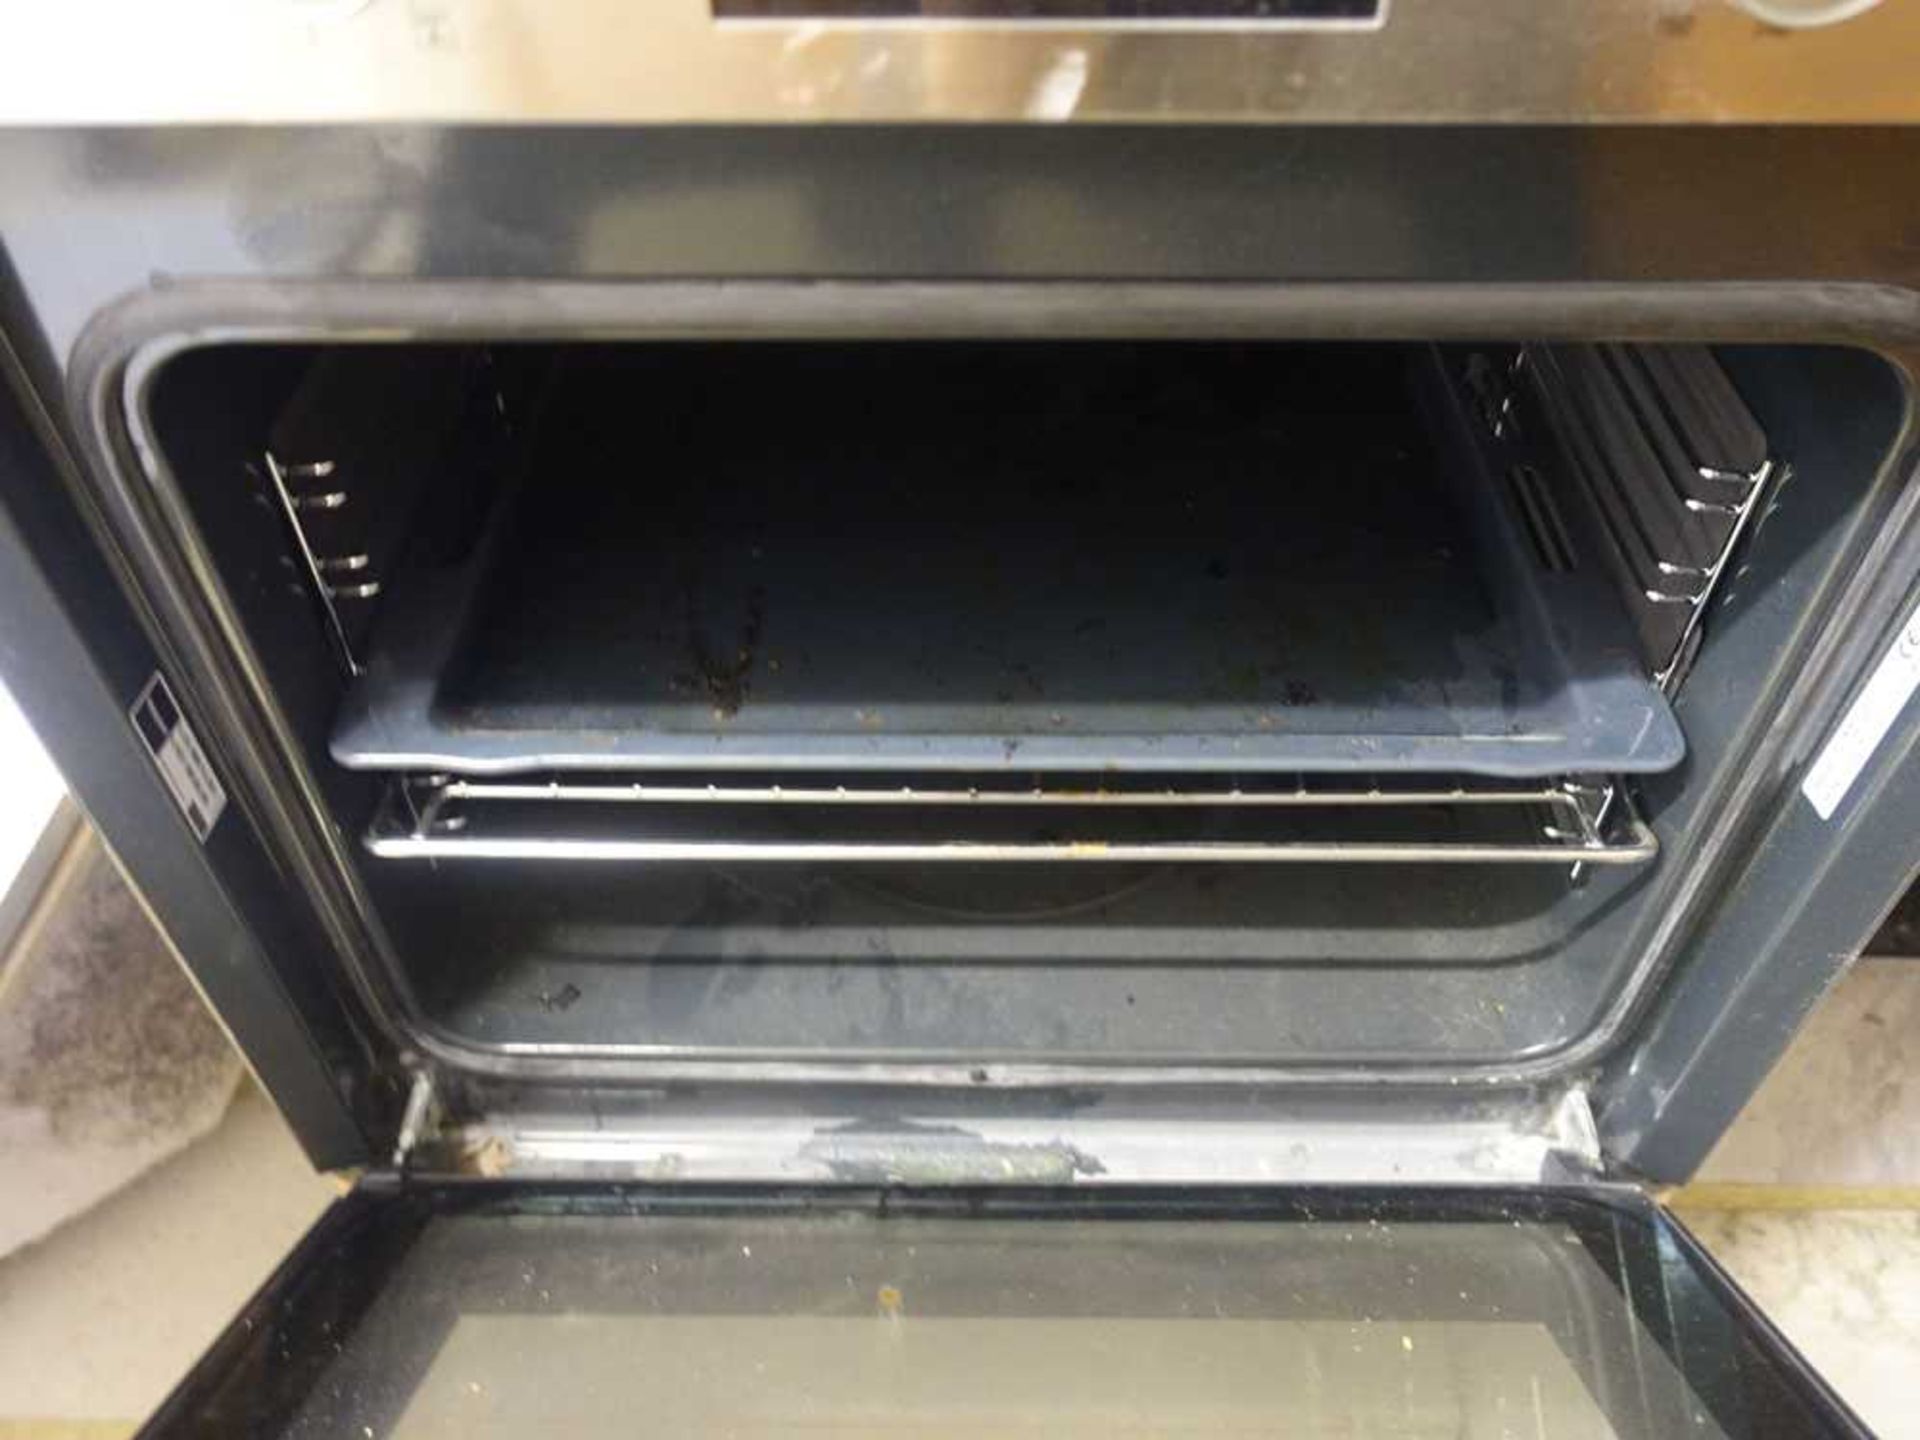 +VAT Hotpoint built-in domestic fan oven - Image 3 of 3